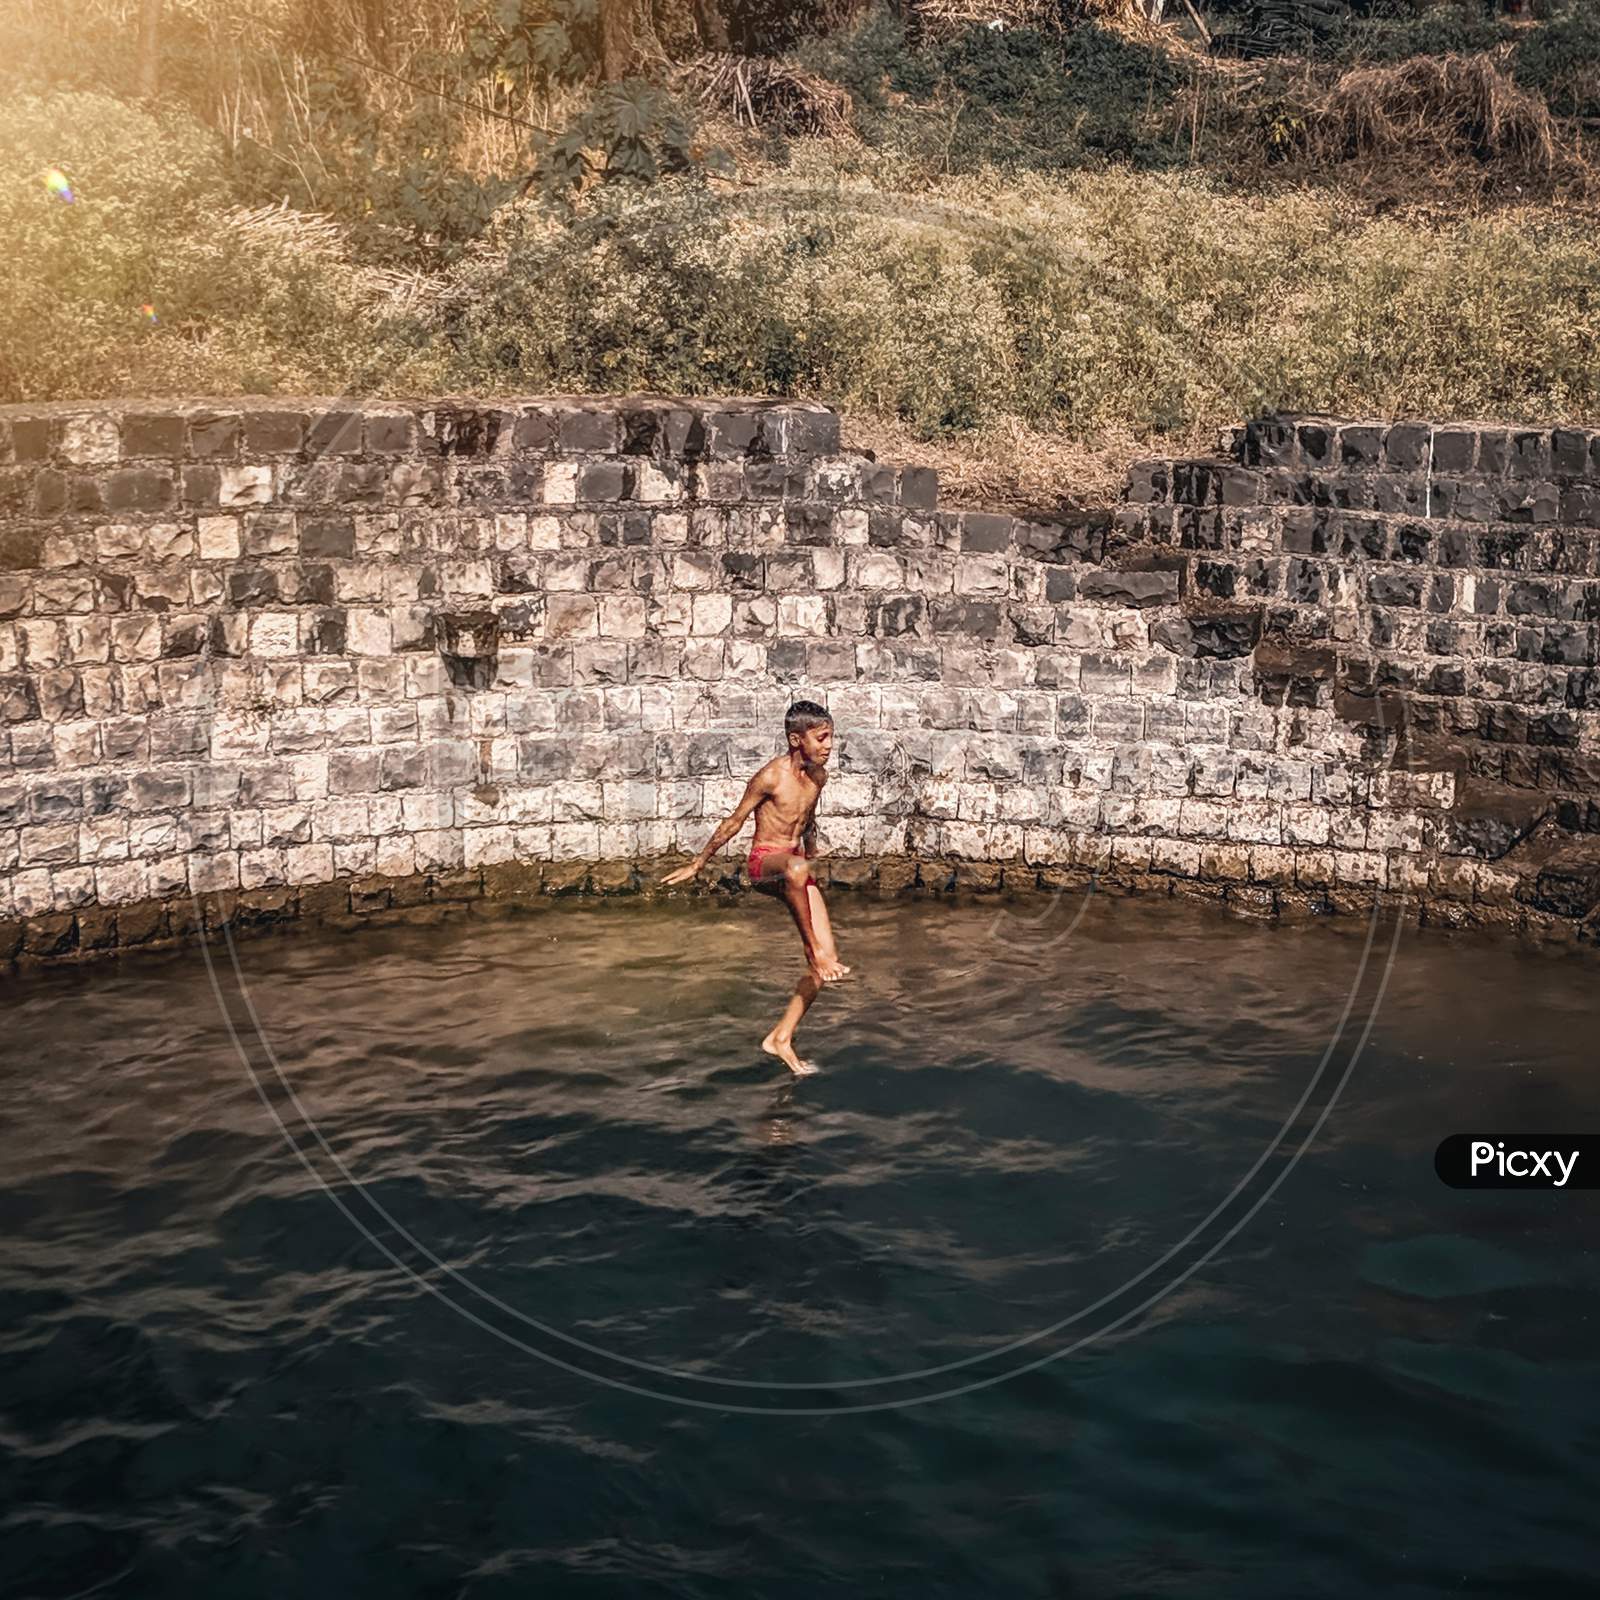 A boy jumping in a well